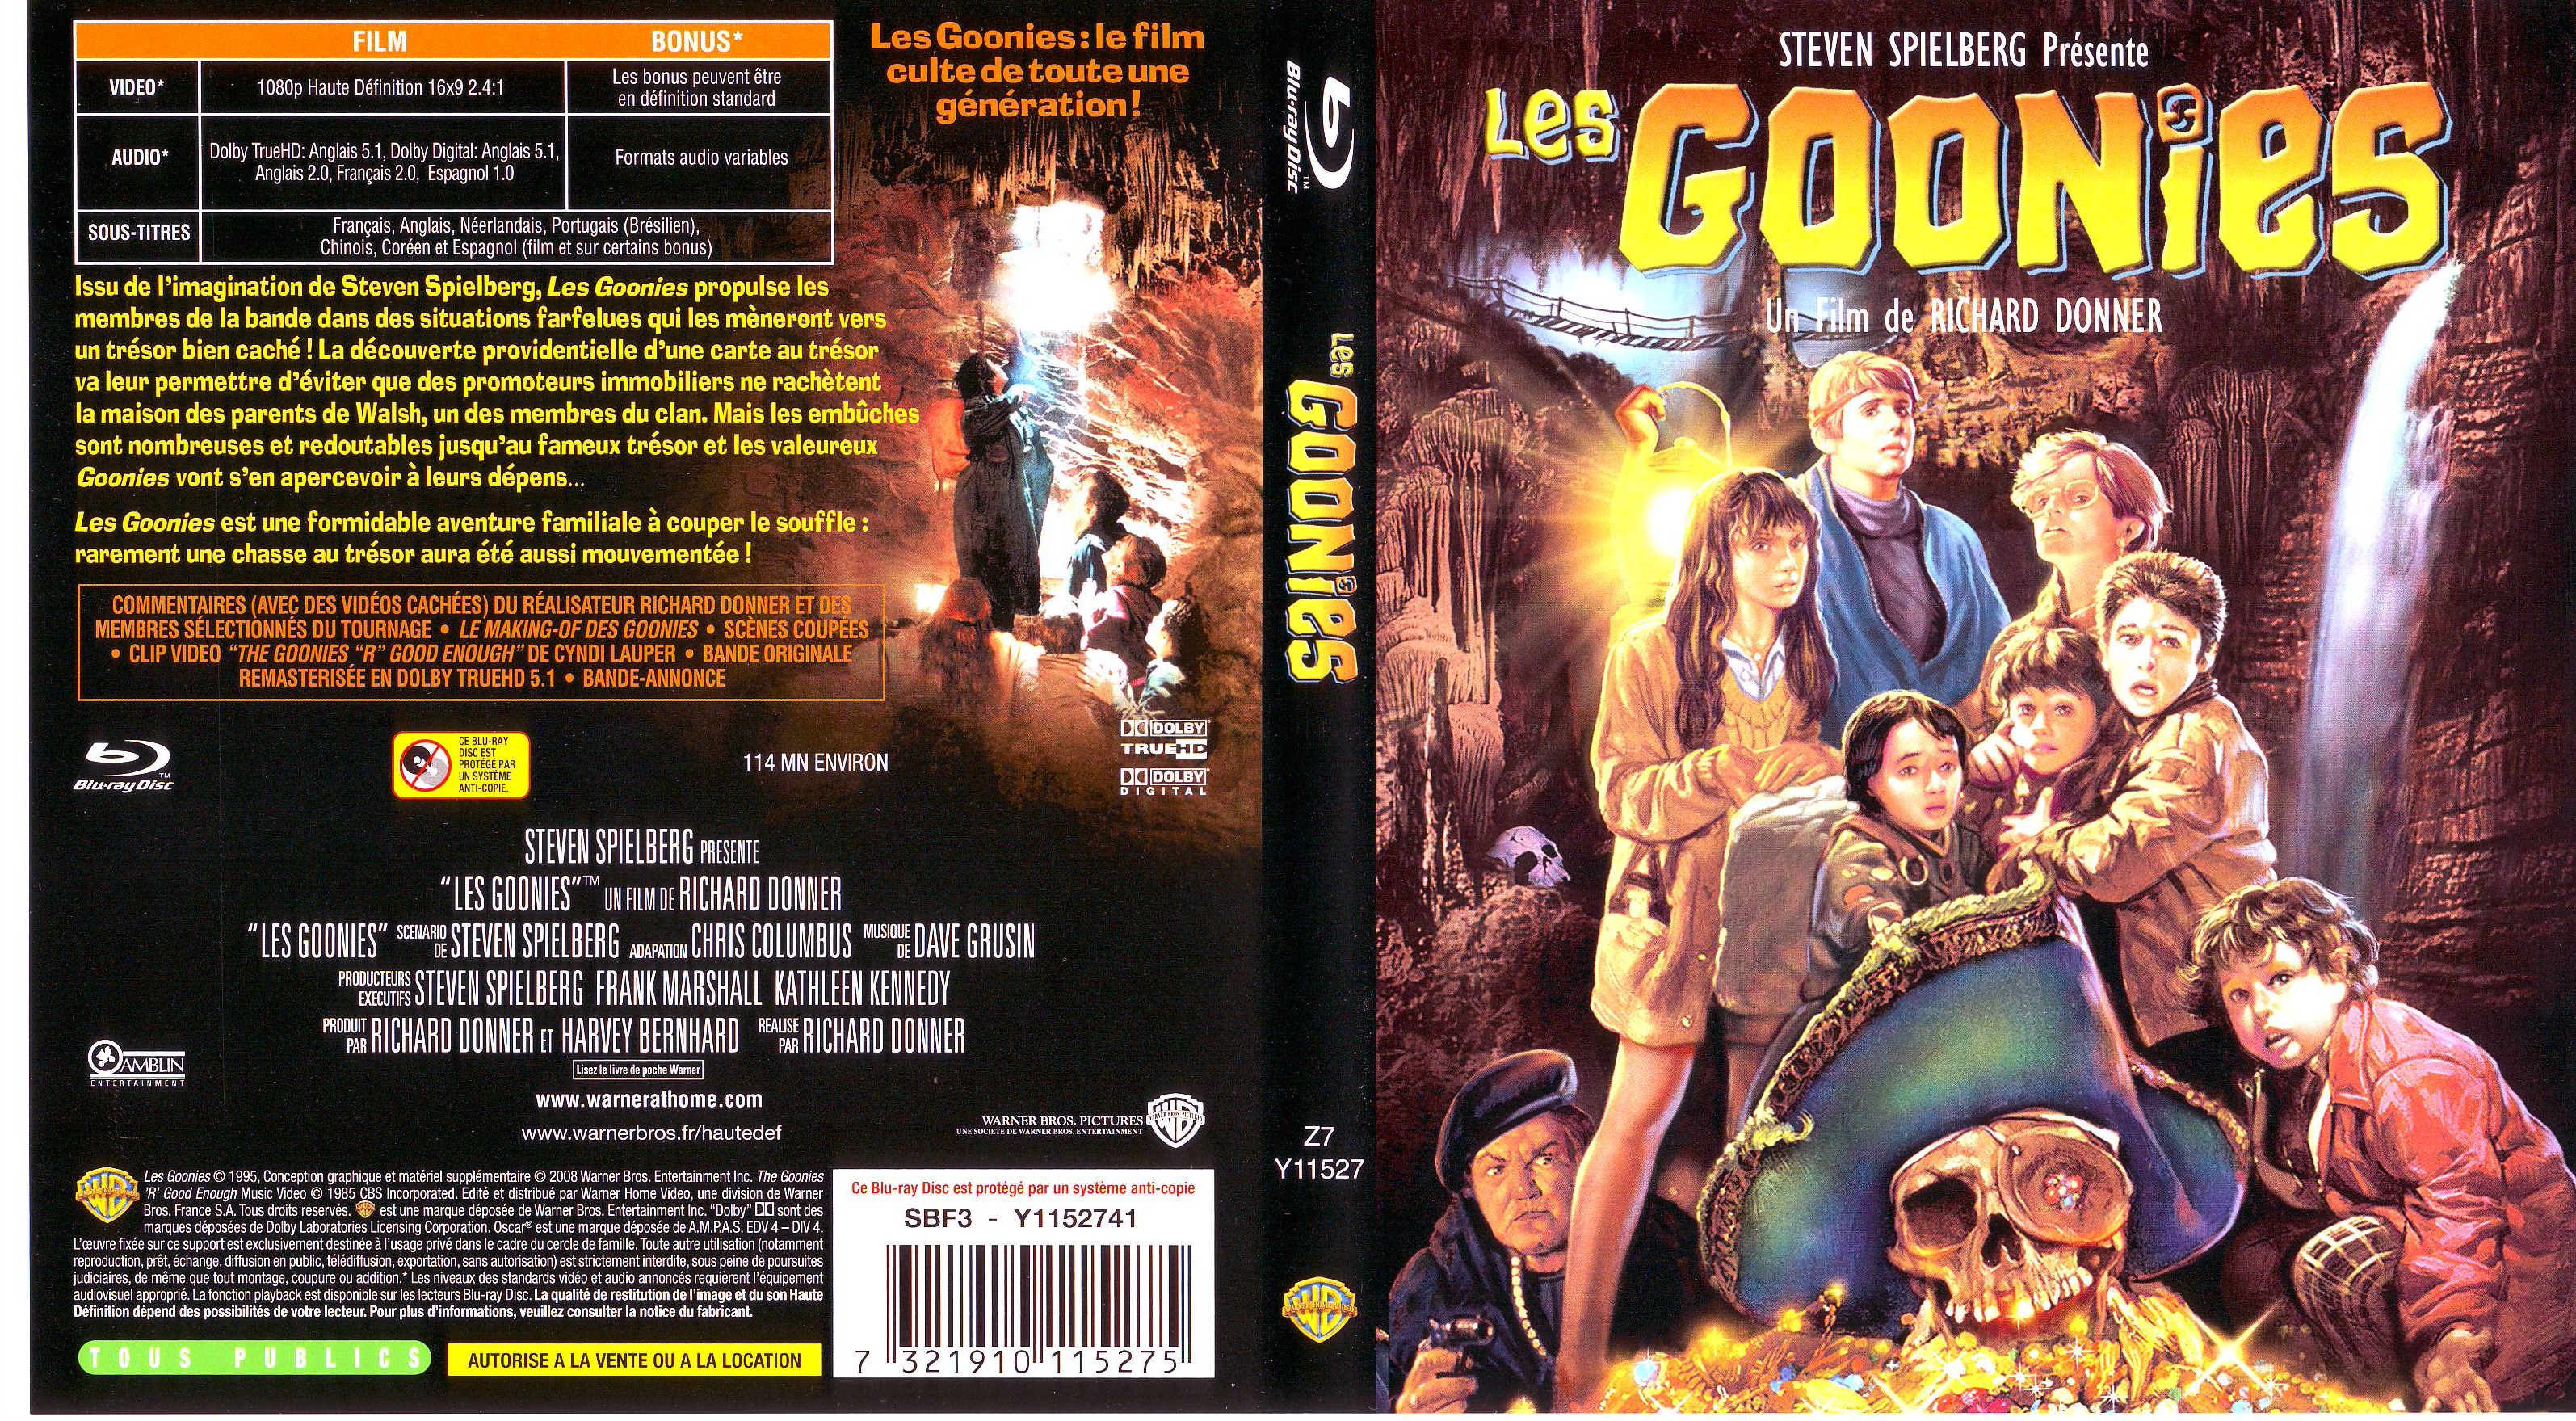 Jaquette DVD Les goonies (BLU-RAY)